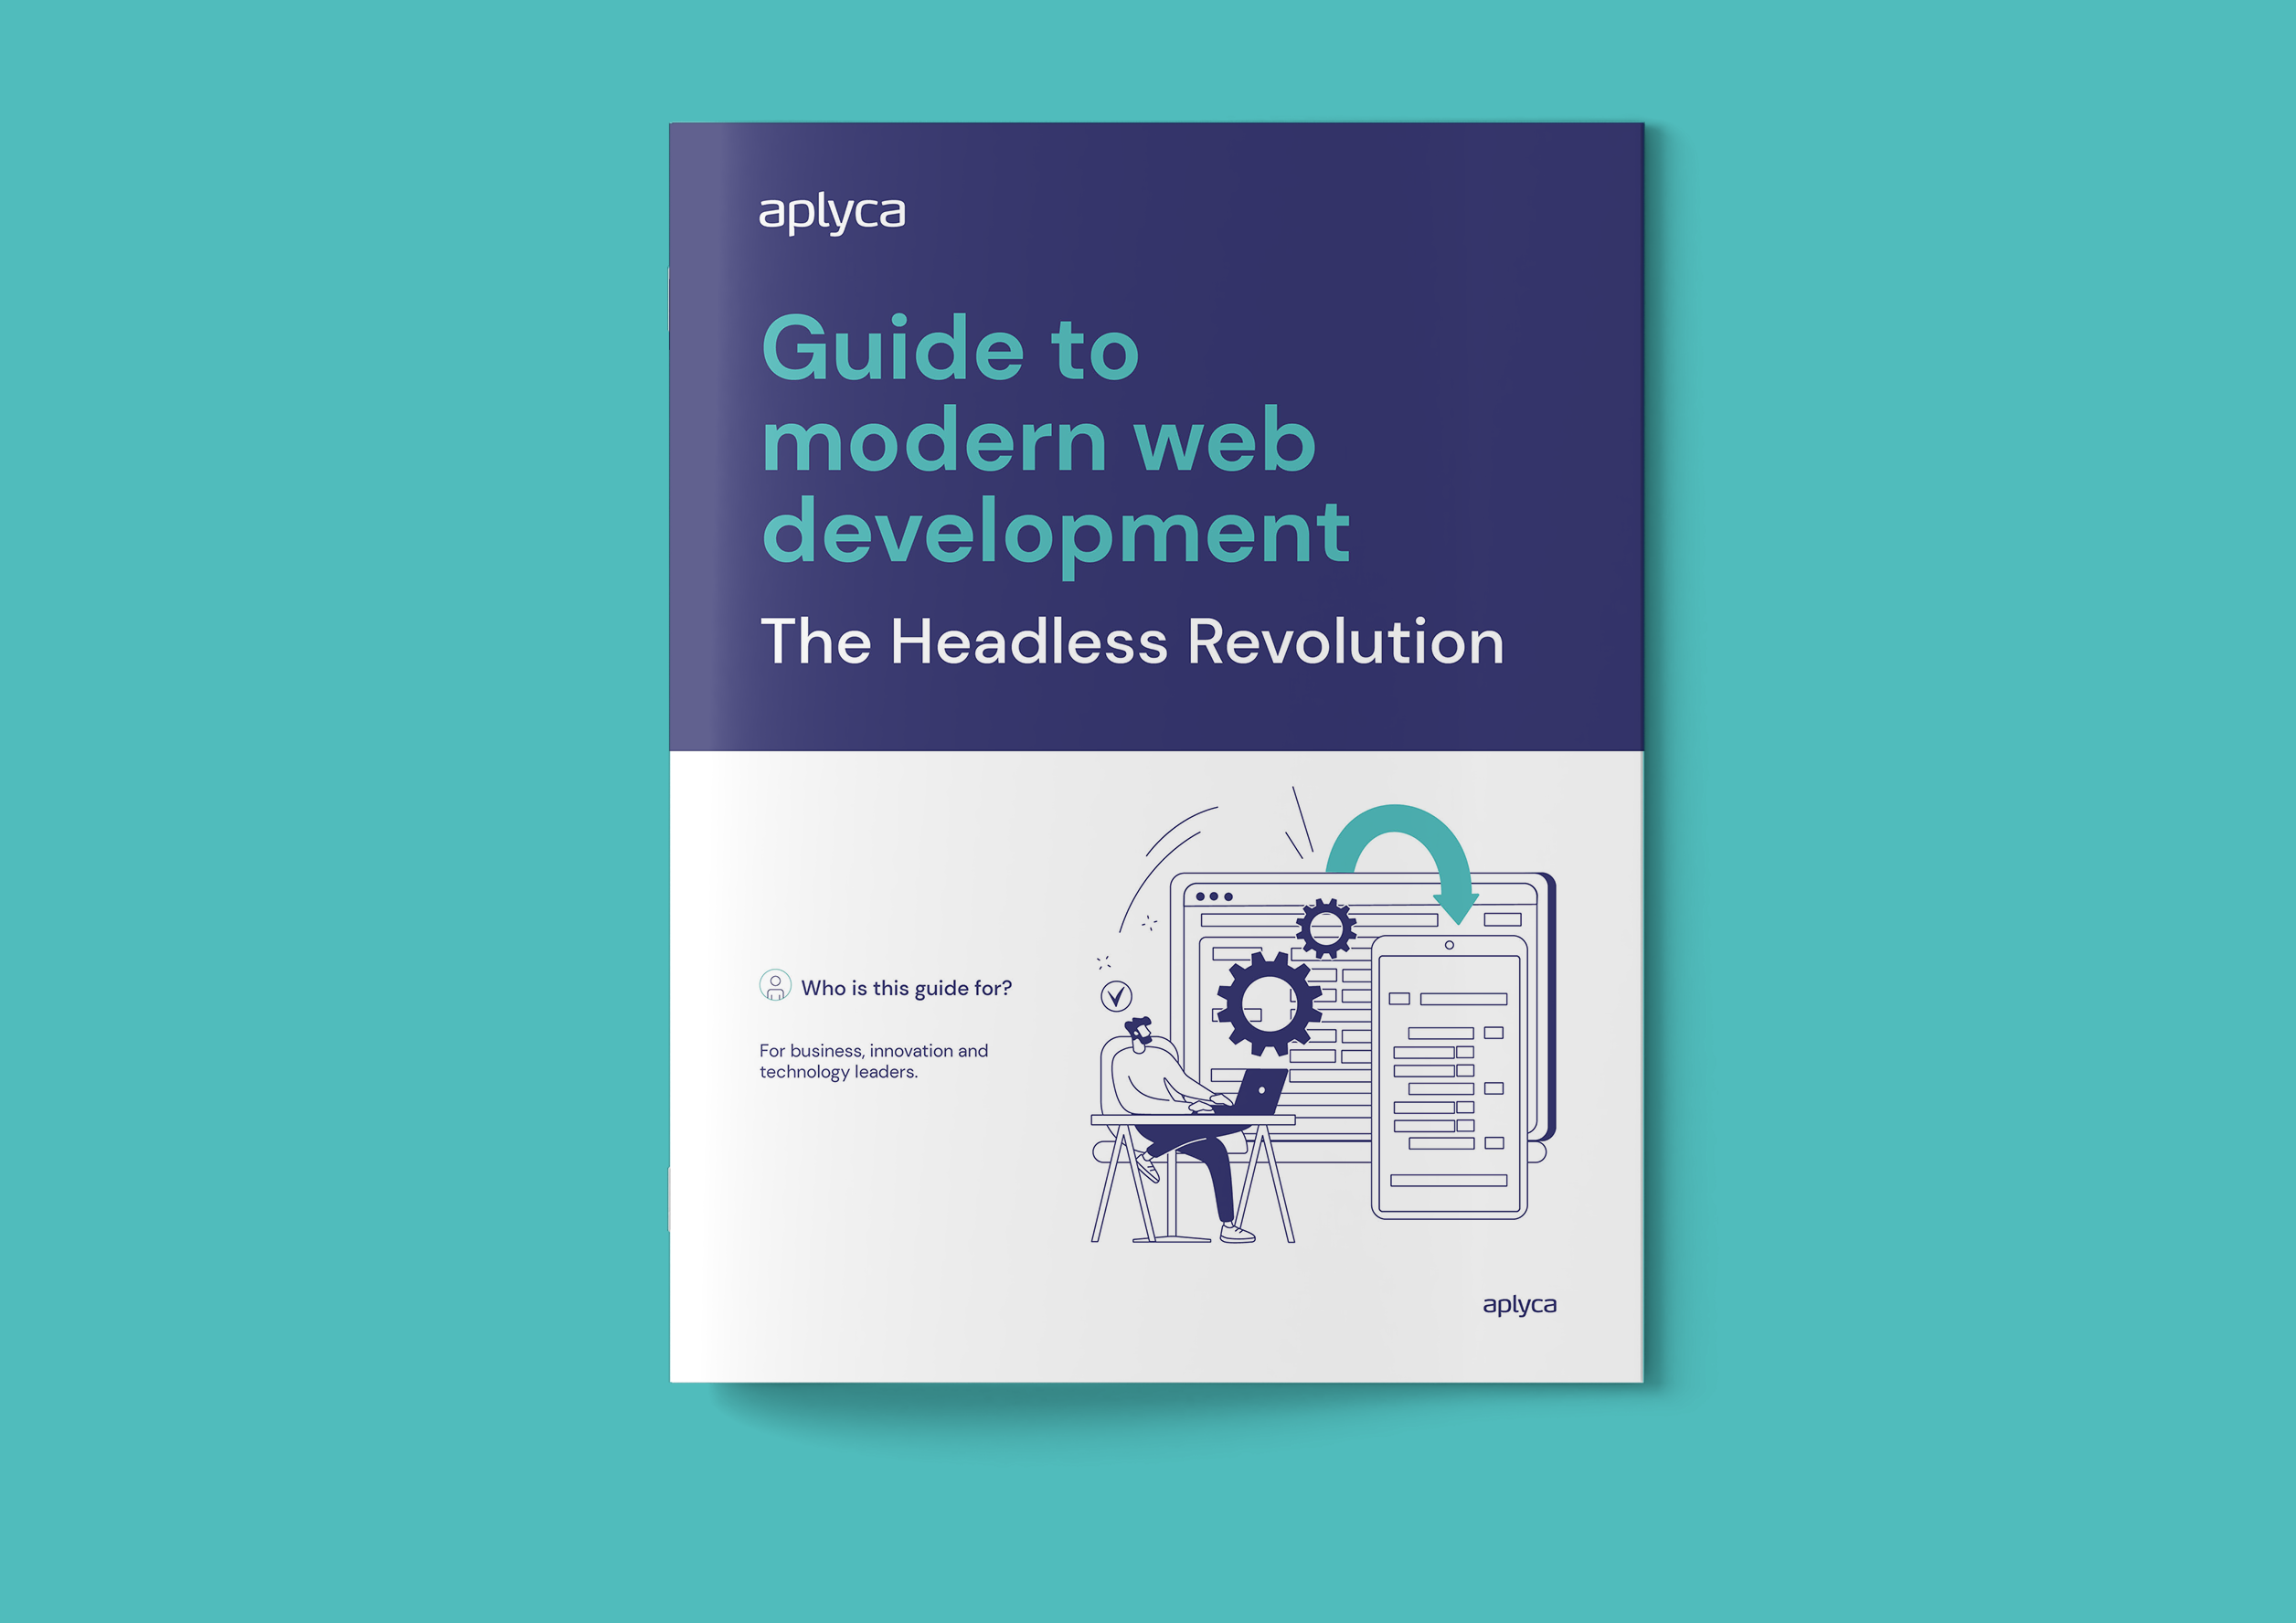 Download the guide to modern web development by Aplyca here